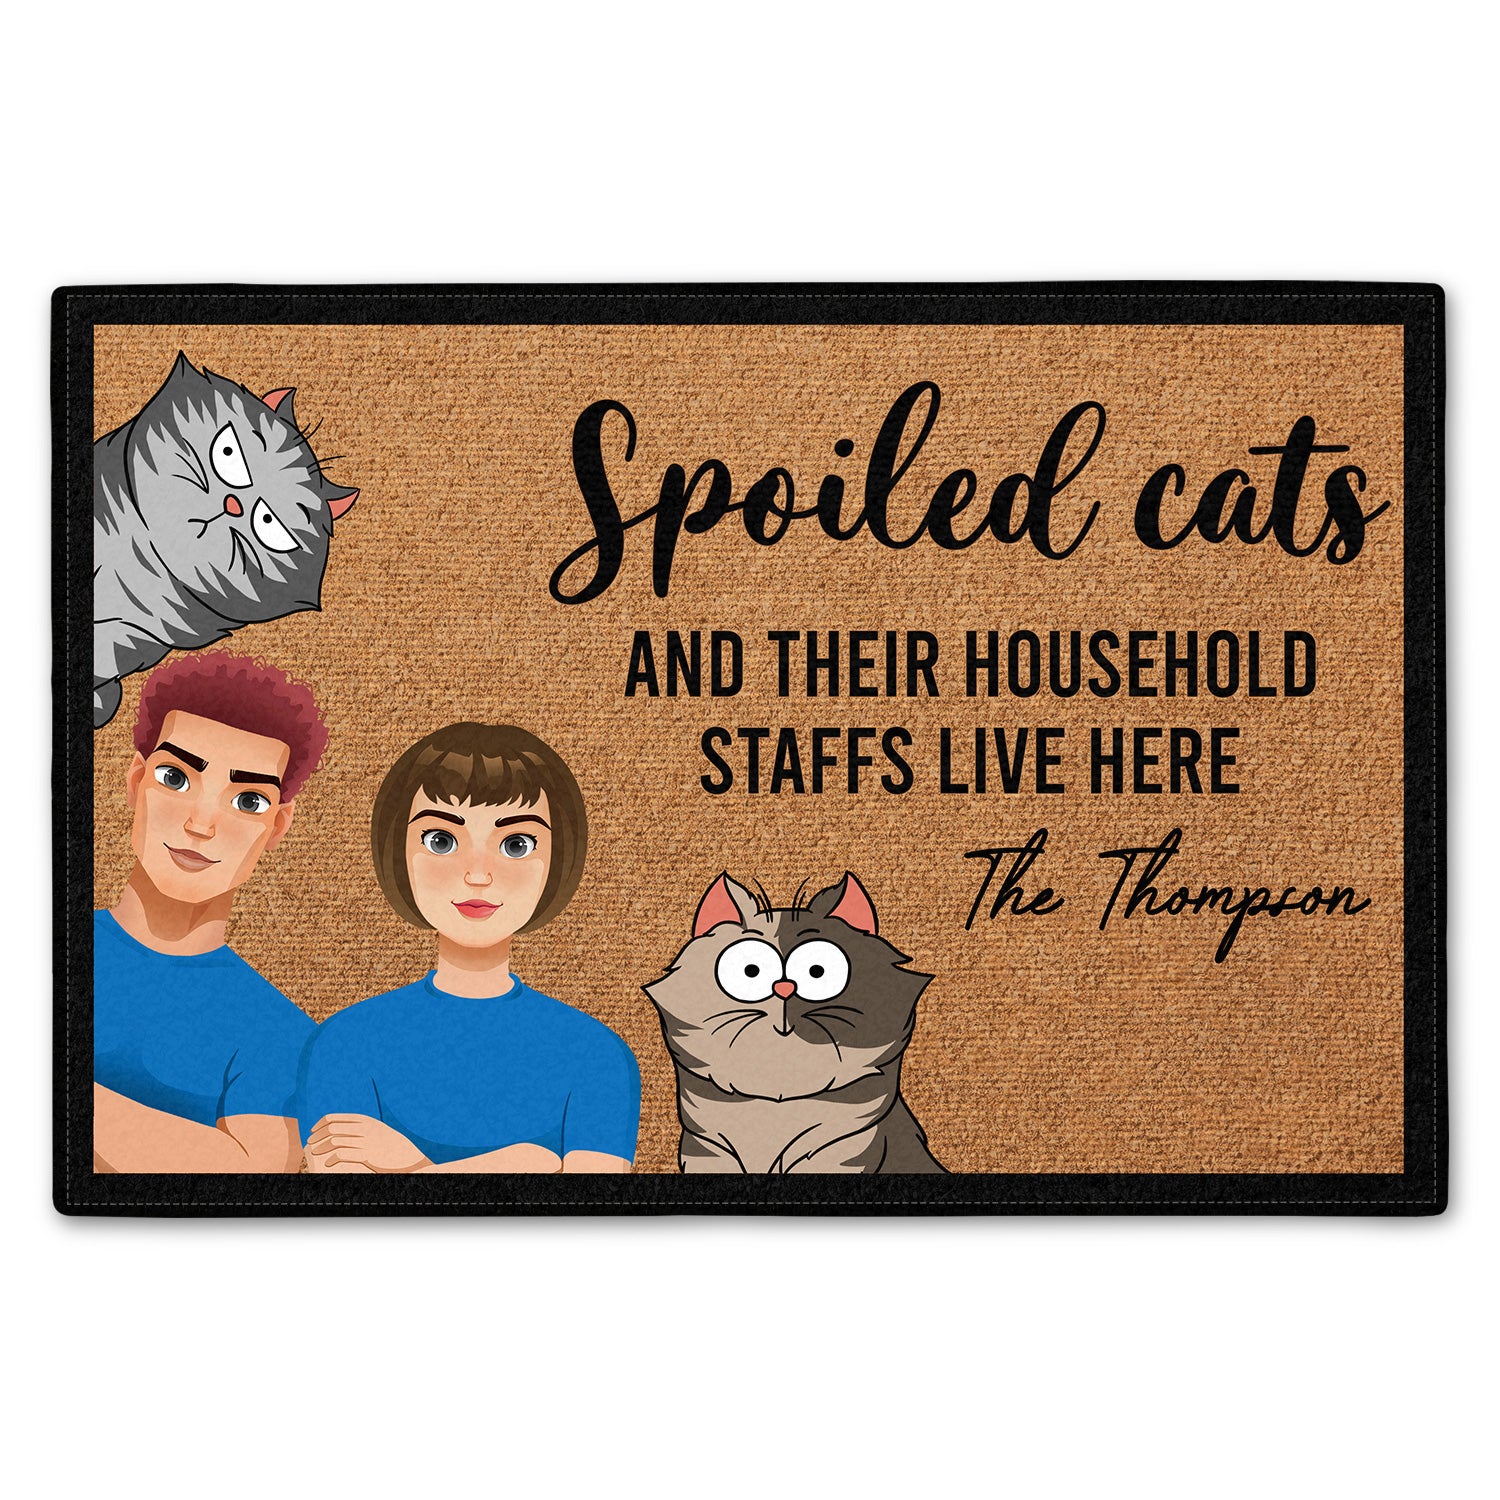 Spoiled Cats & Their Household Staffs Live Here - Gift For Cat Lovers, Housewarming Gift - Personalized Doormat